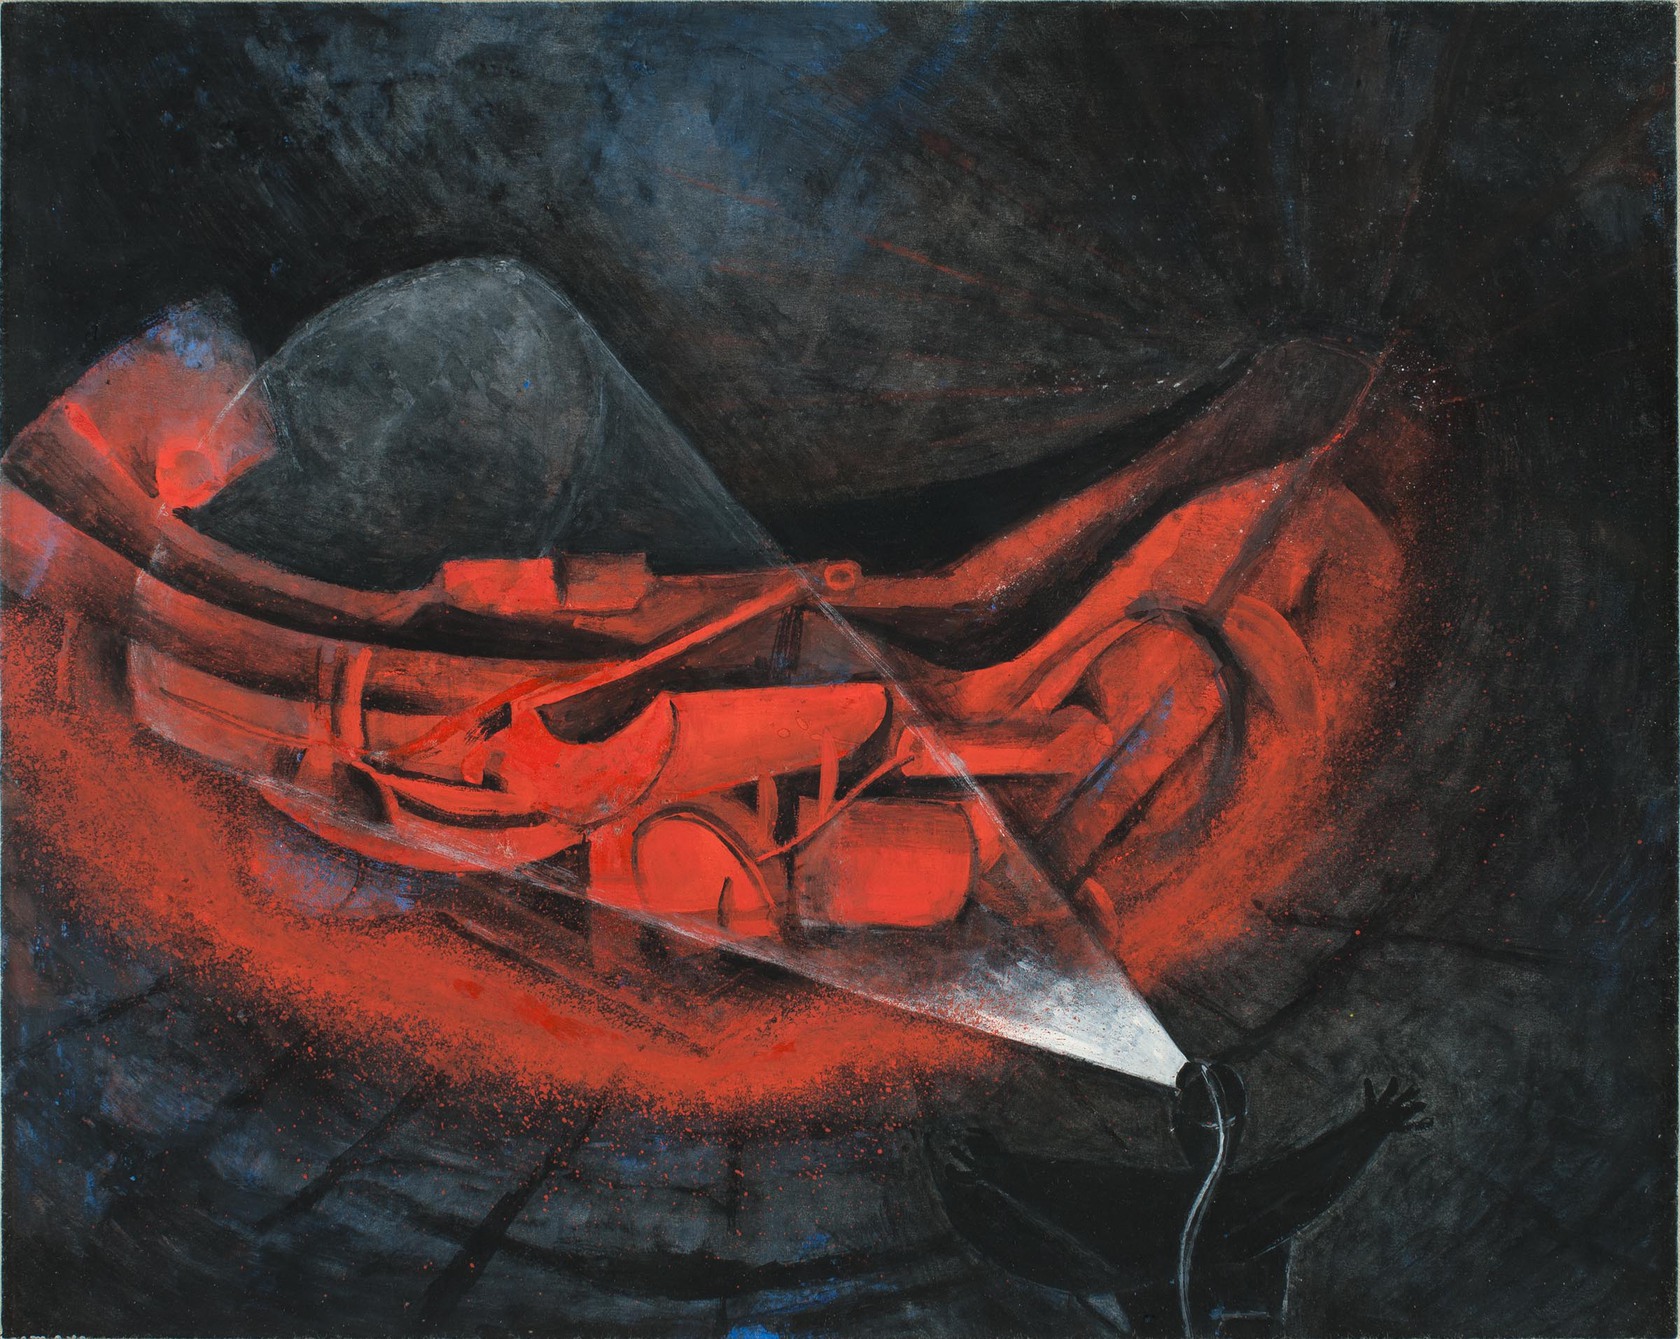 Rufino Tamayo, The Continuous Miner, 1954.